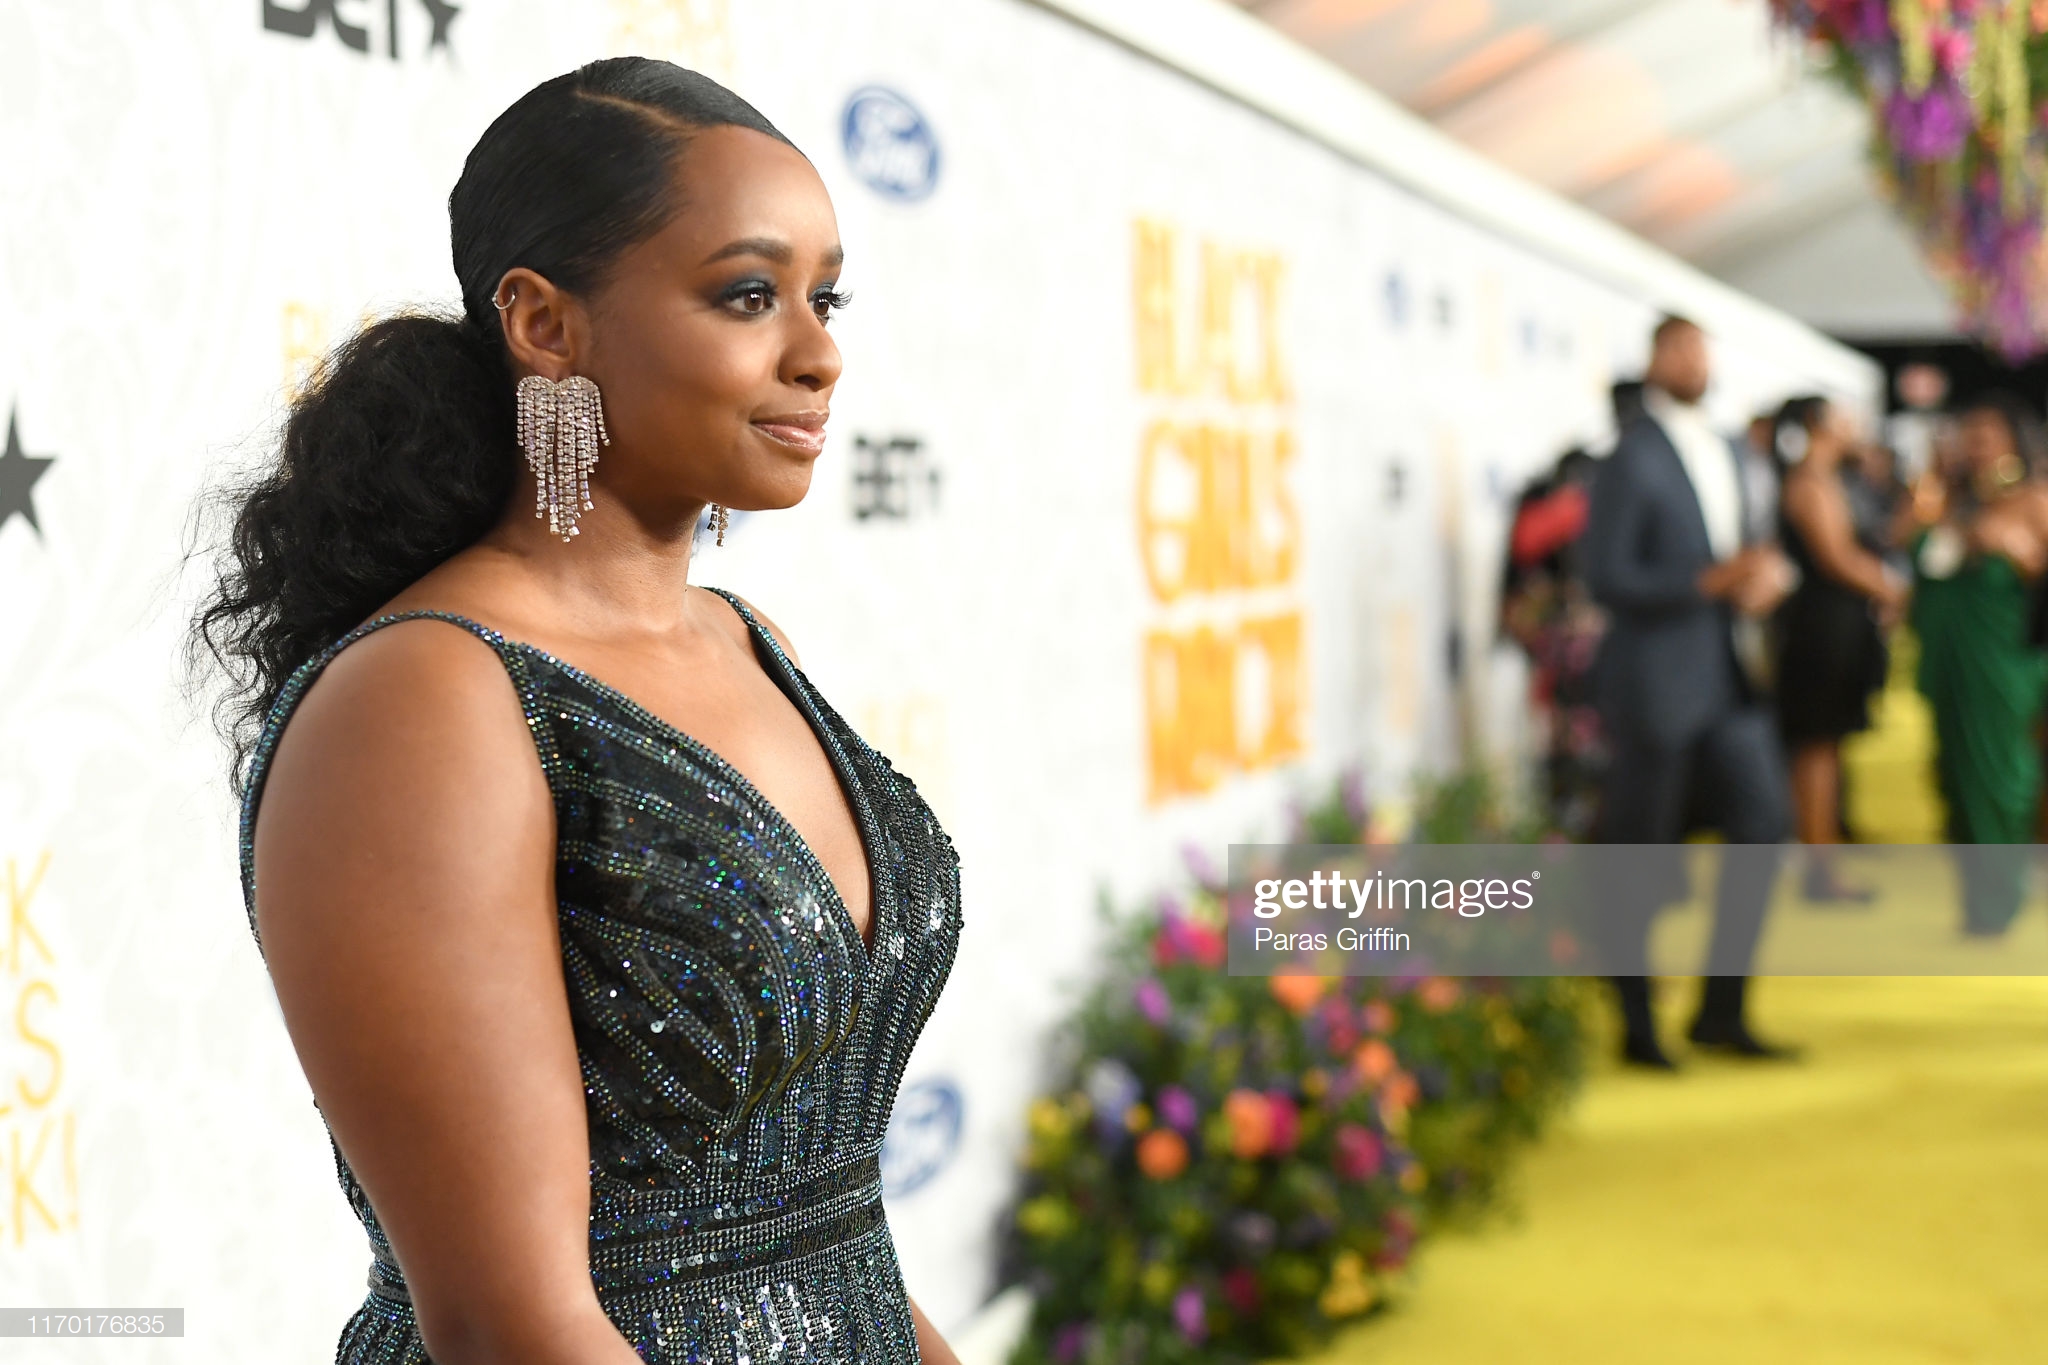 NEWARK, NEW JERSEY - AUGUST 25:  Tiffany Davis attends Black Girls Rock 2019 Hosted By Niecy Nash at NJPAC on August 25, 2019 in Newark, New Jersey.  (Photo by Paras Griffin/Getty Images for BET)